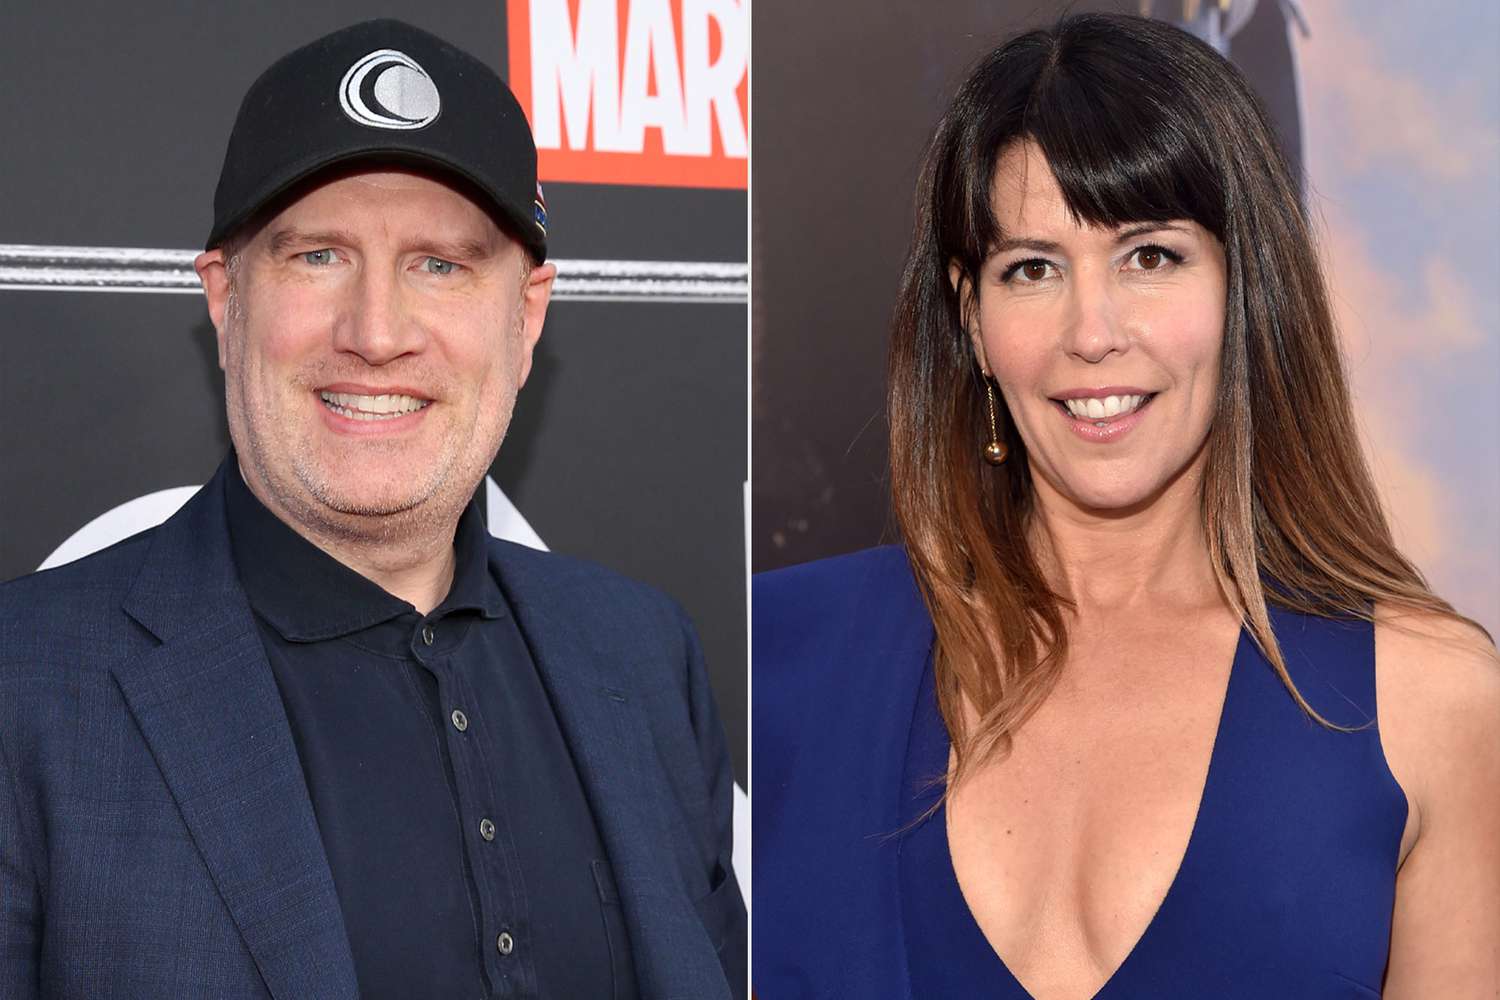 Kevin Feige and Patty Jenkins' 'Star Wars' movies are reportedly dead